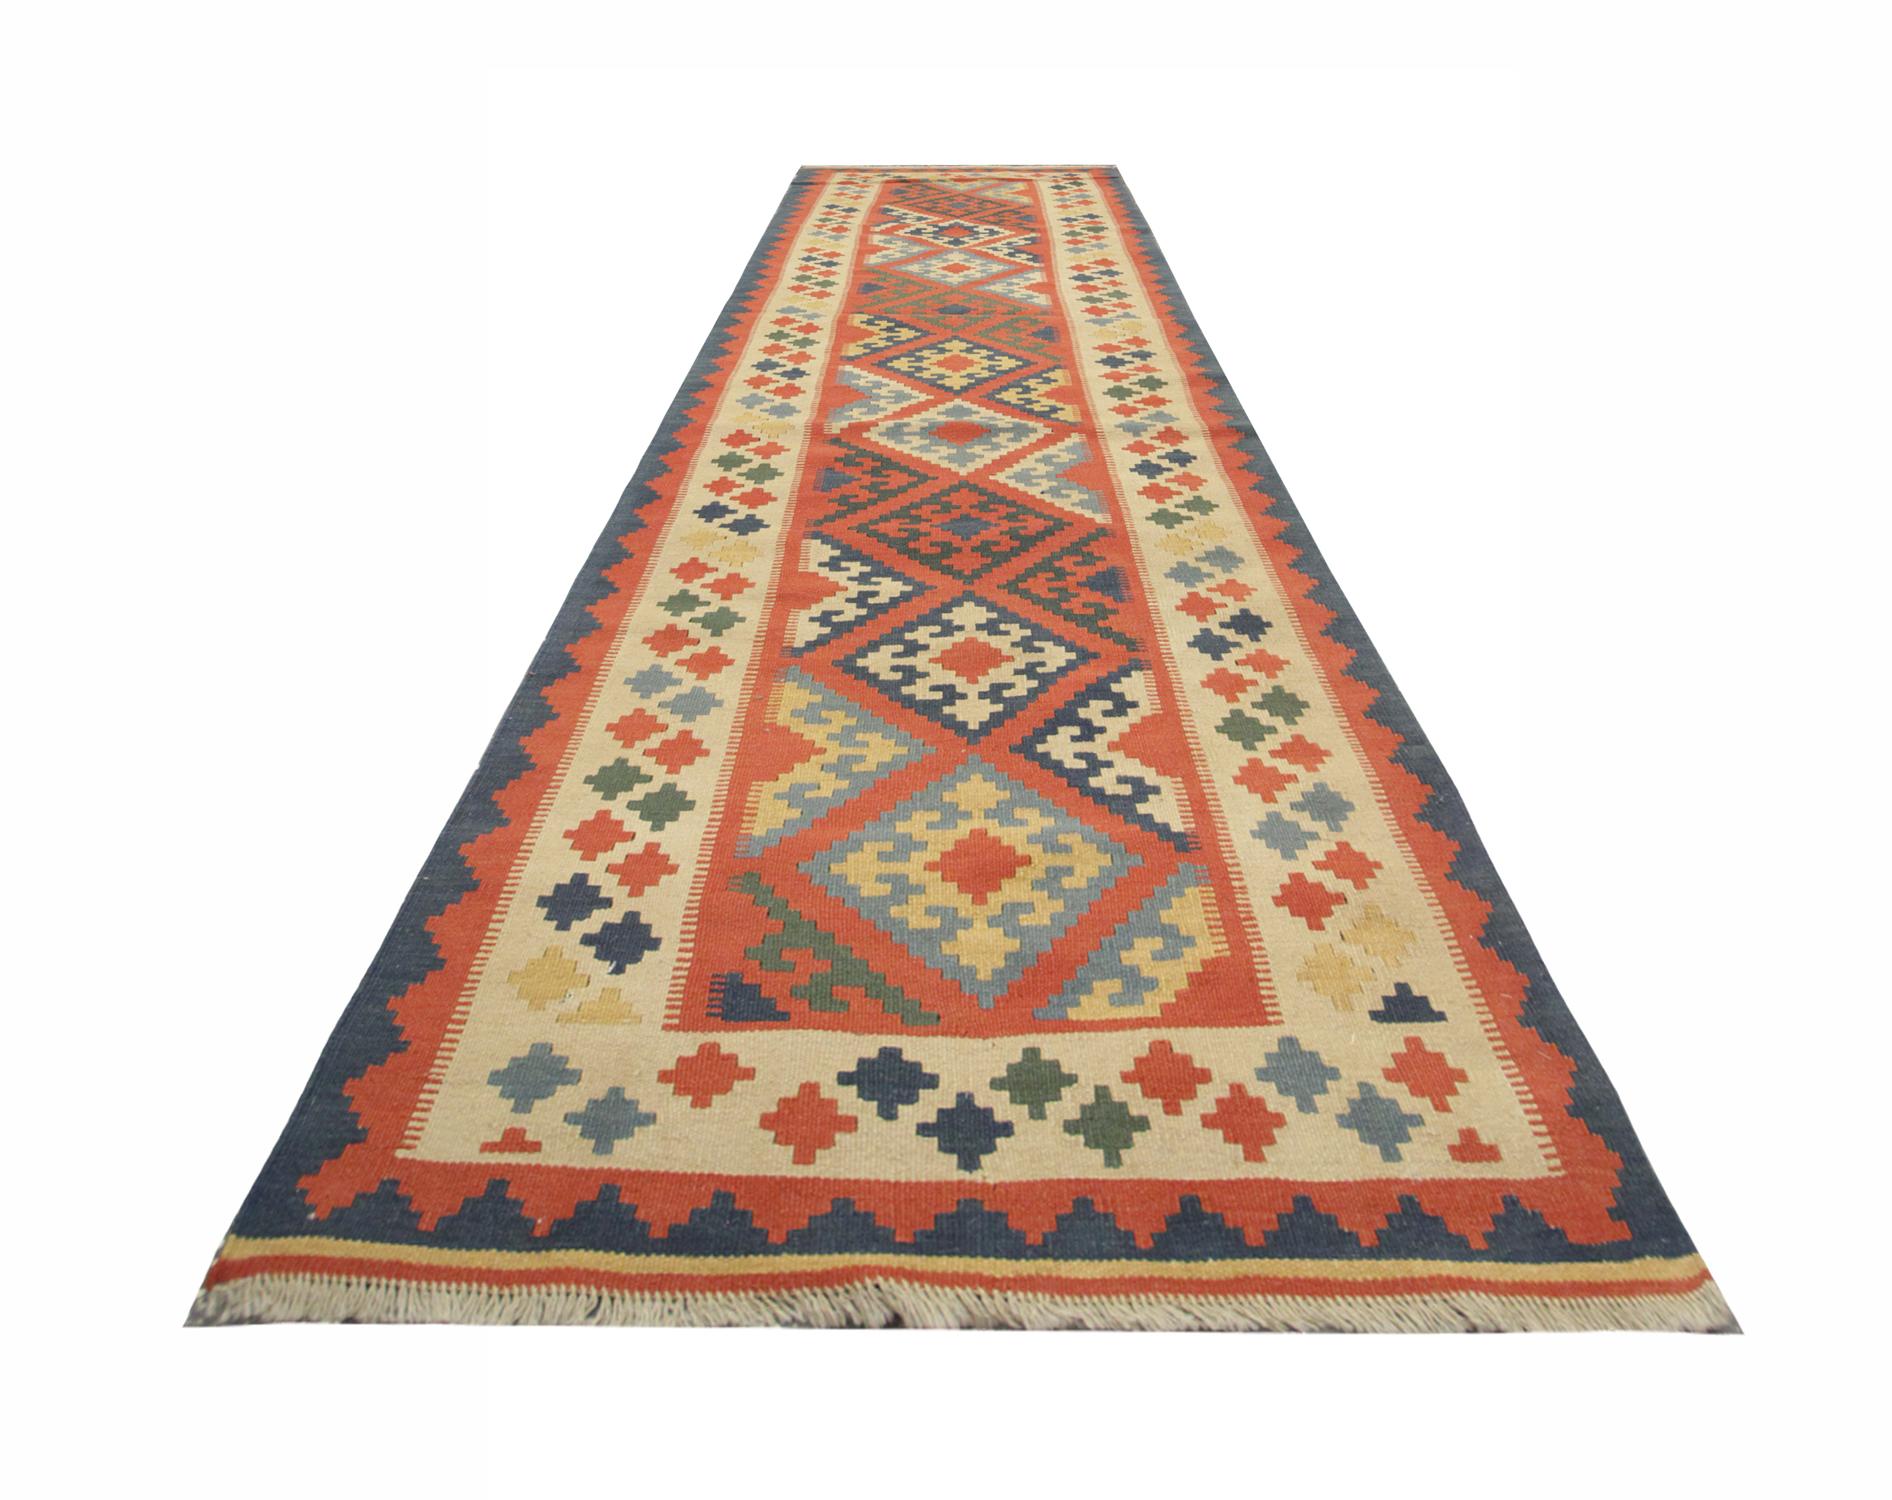 This beautiful Kilim rug has been woven with subtle muted tones. Orange is the main colour in this geometric rug. Zig-zags and diamond patterns cover this runner beautifully designed and handwoven. This rug is sure to uplift any interior instantly.